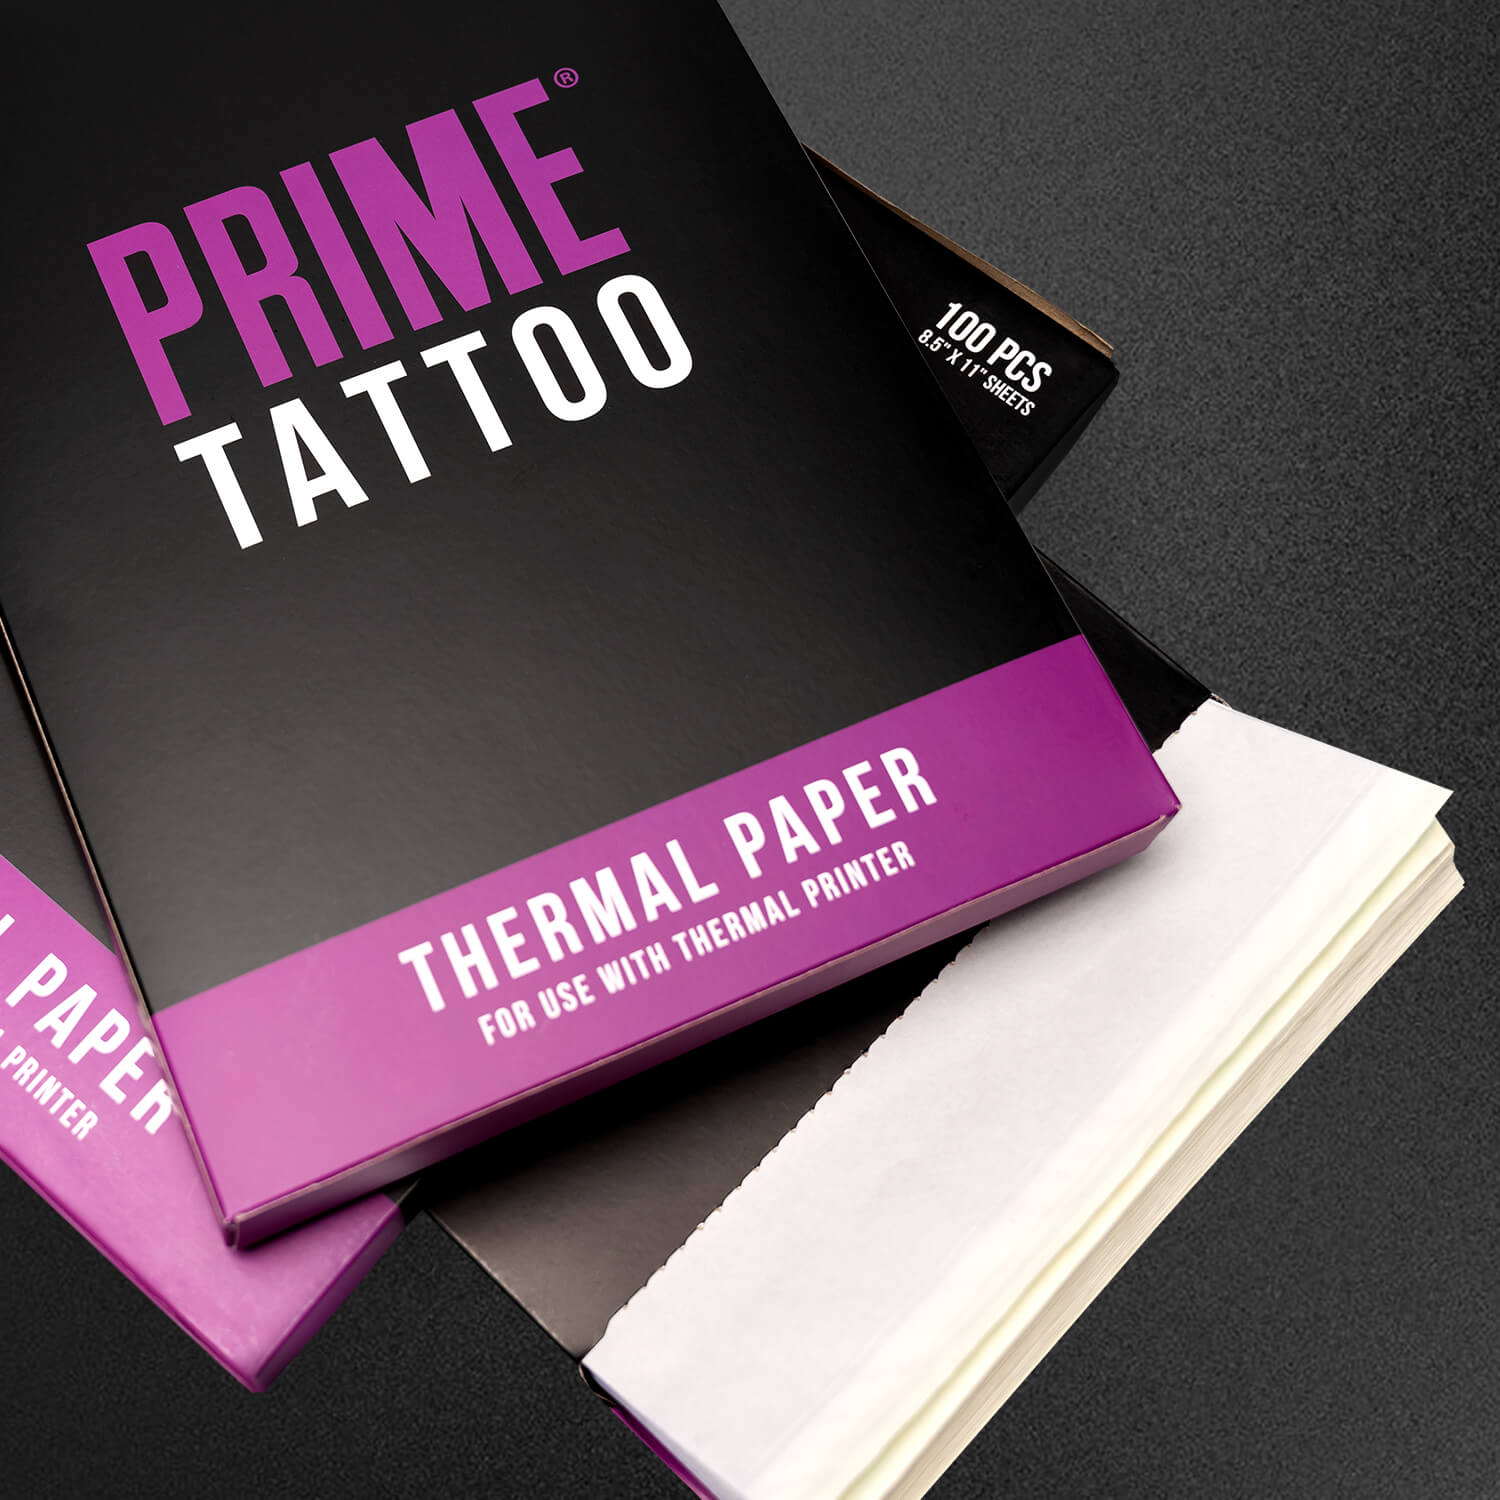 How To Use Tattoo Transfer Paper With A Printer